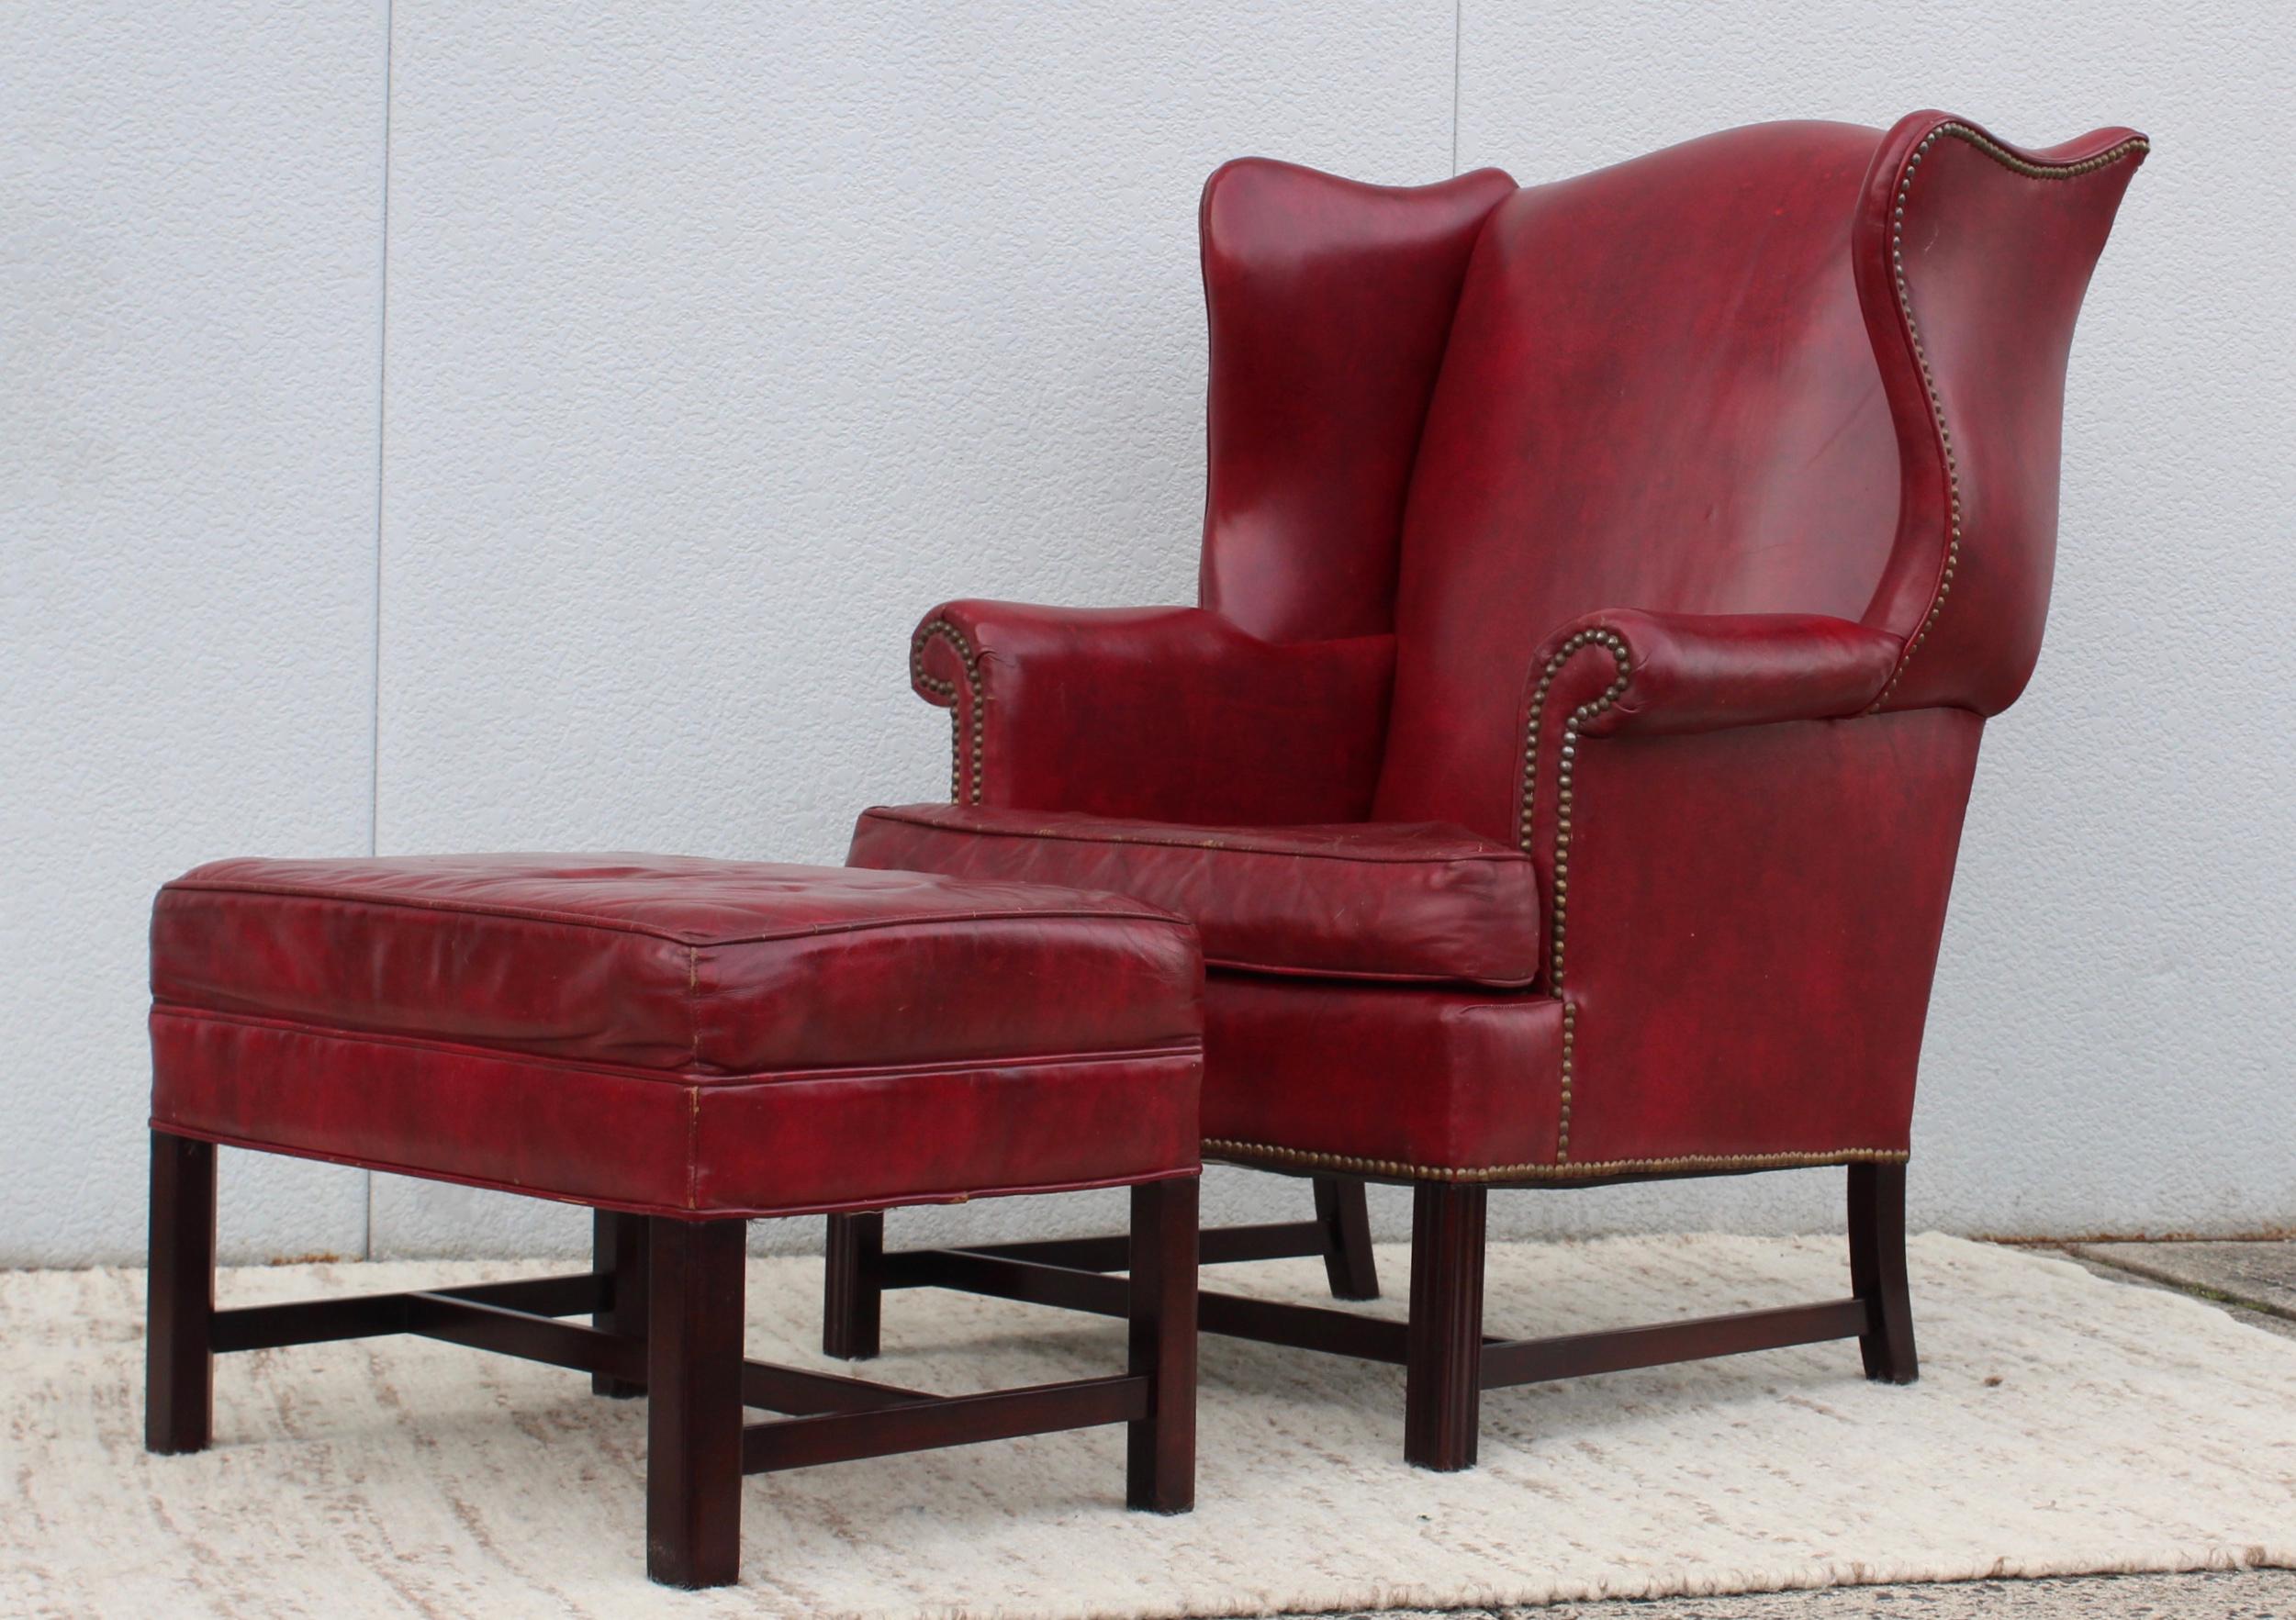 American 1960's Red Leather Wing-Back Chair and Ottoman by Hickory Chair